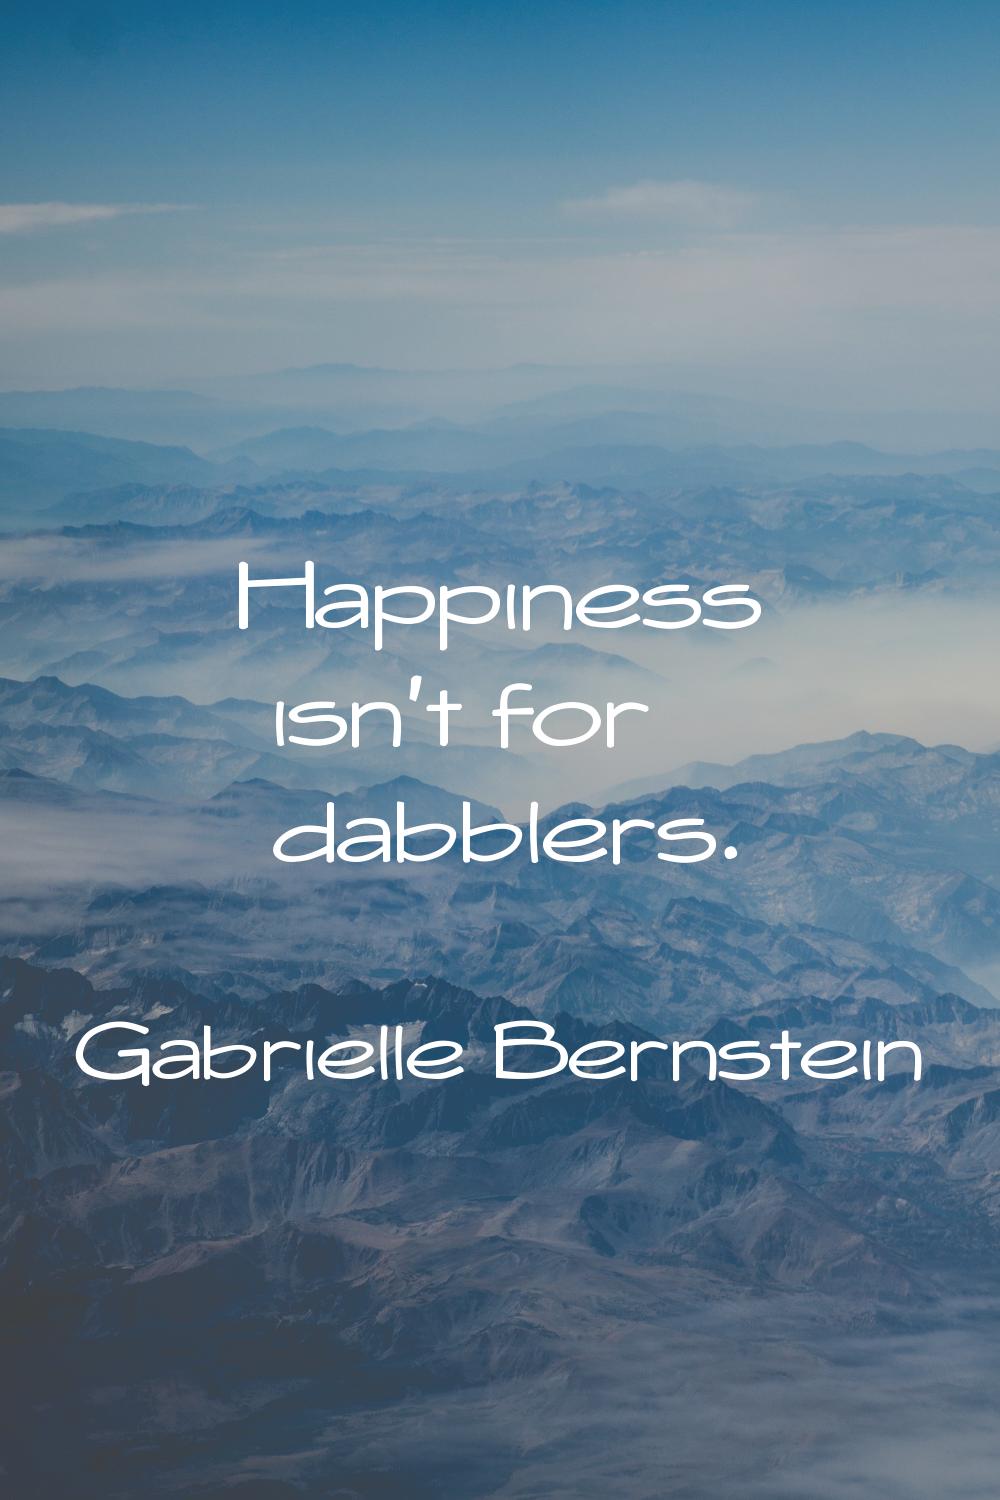 Happiness isn't for dabblers.